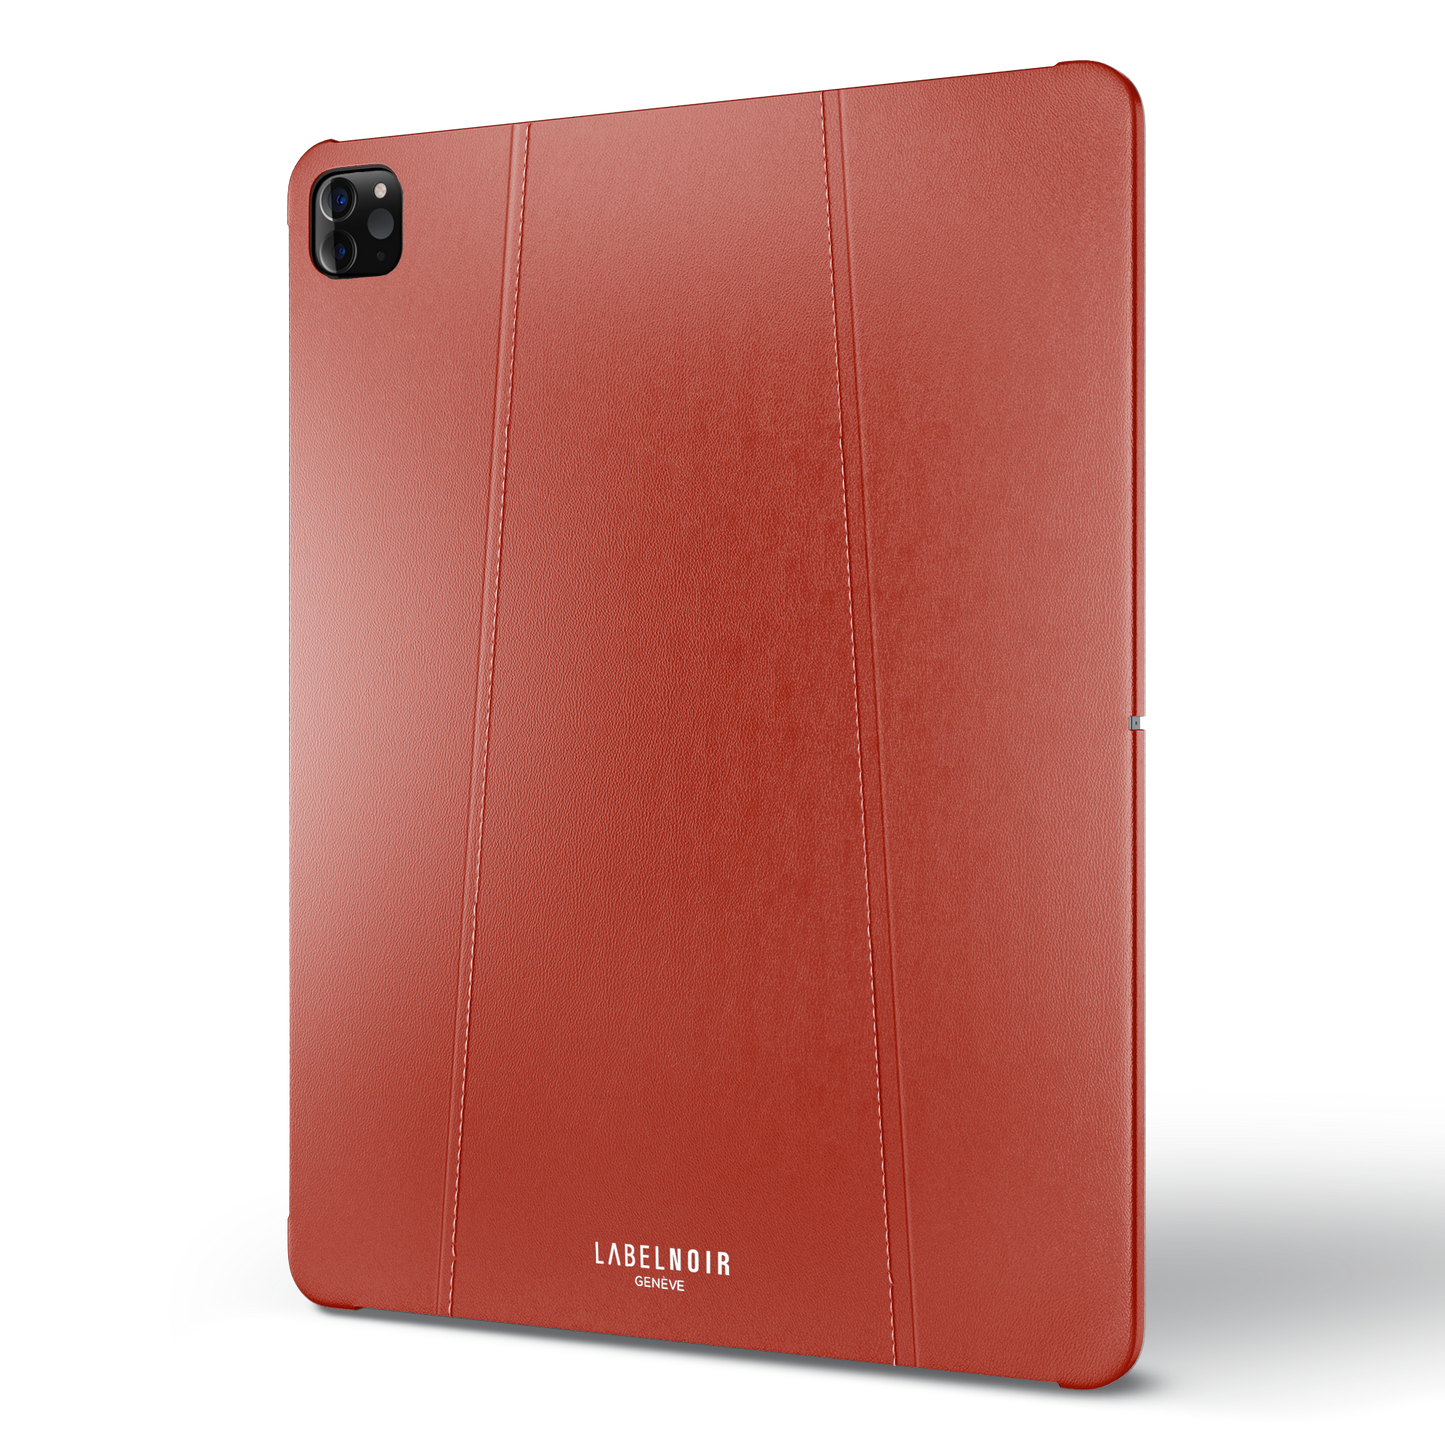 Ipad Pro (6th Gen) 12.9-inch Red Leather Case